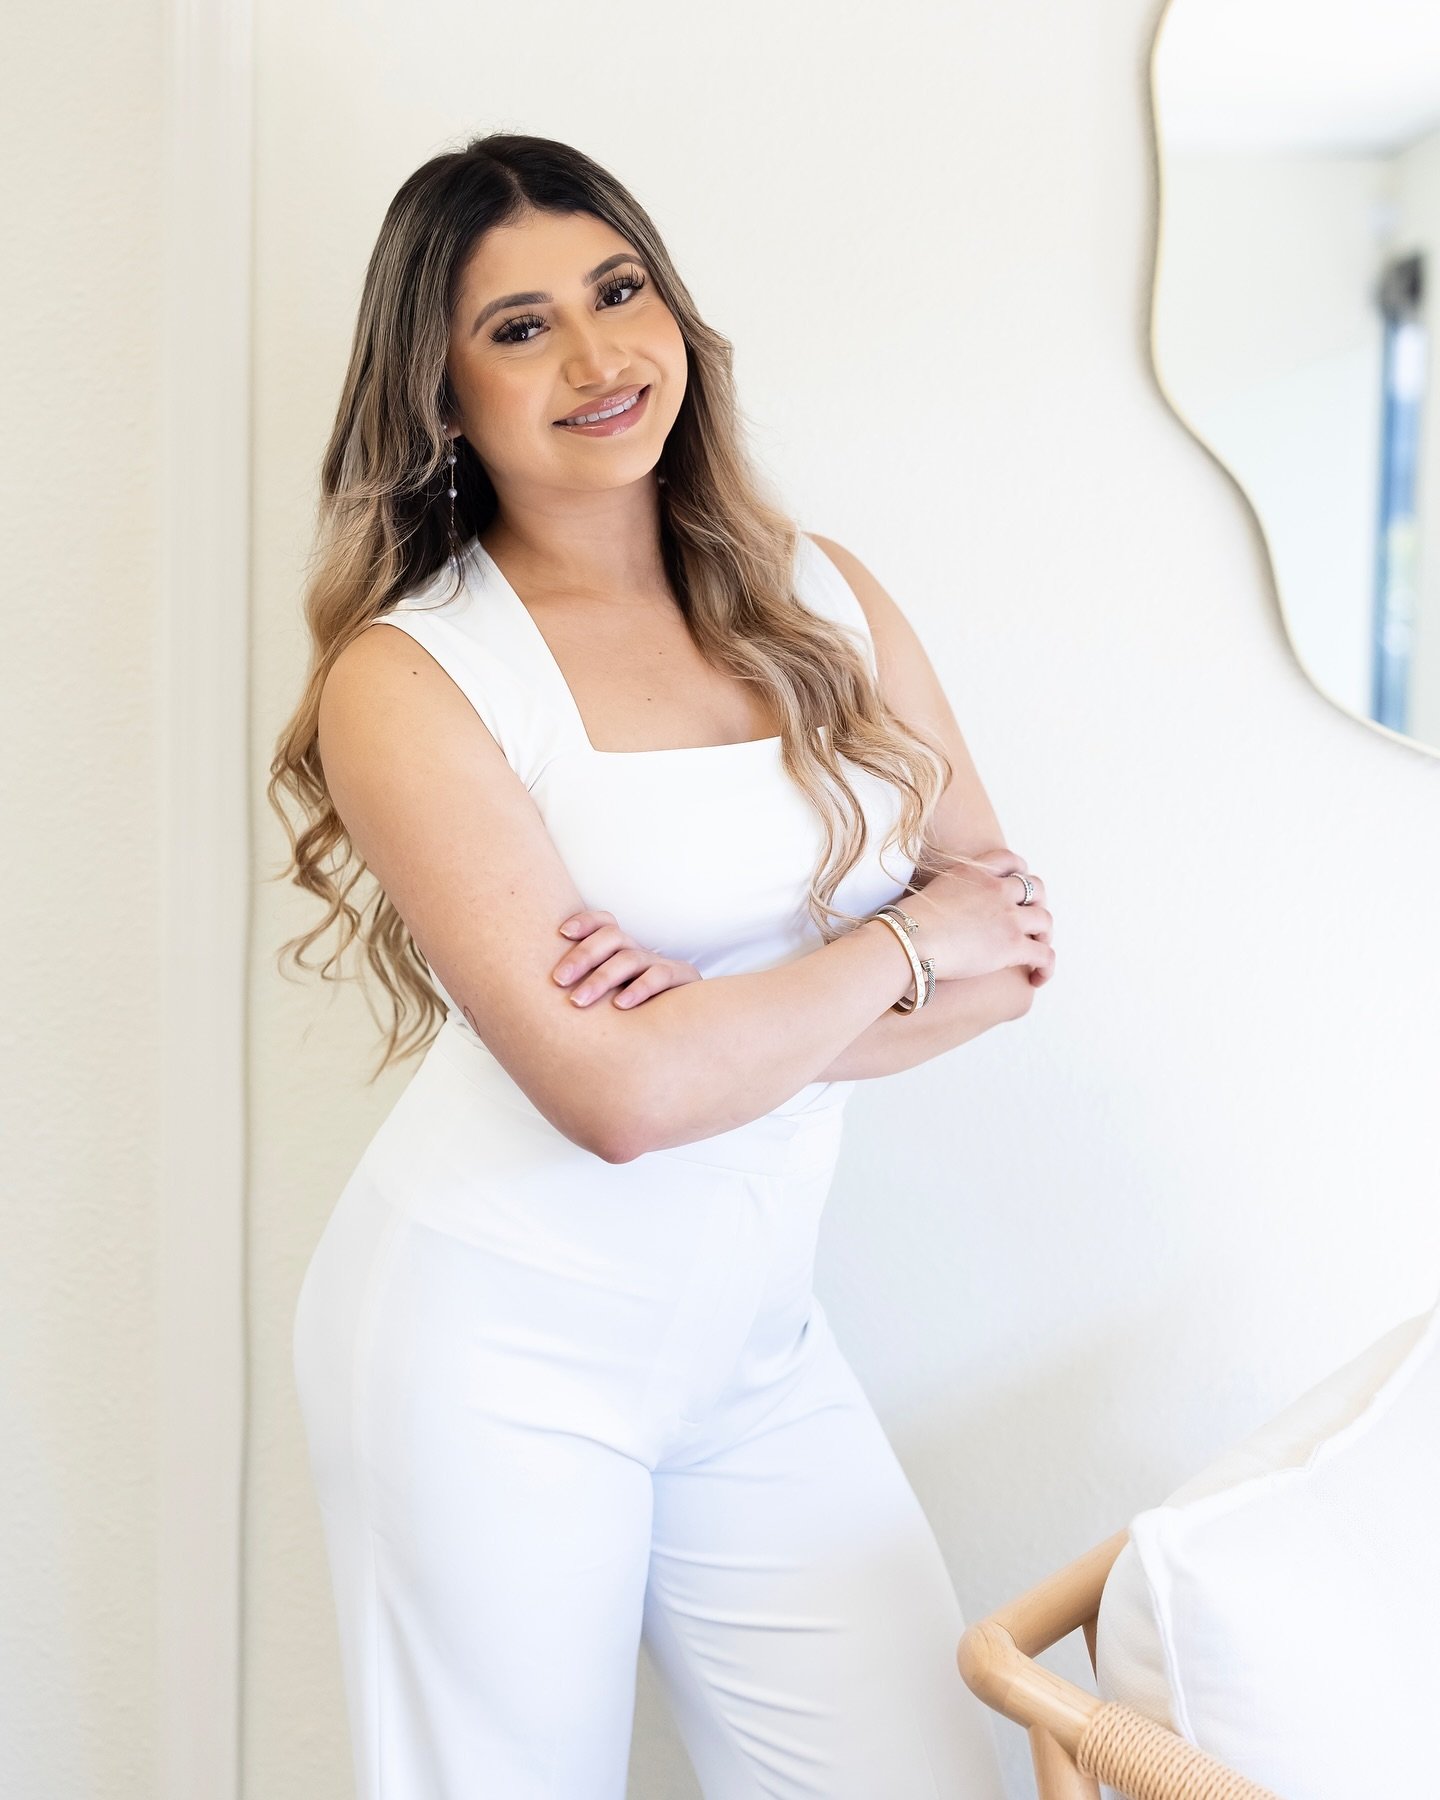 ✨ Meet Vanessa ✨

Vanessa is a medical assistant and esthetician with over 5 years of experience. She is passionate about skincare because she struggled with acne herself and wants to help others achieve healthy, beautiful skin. She provides personal